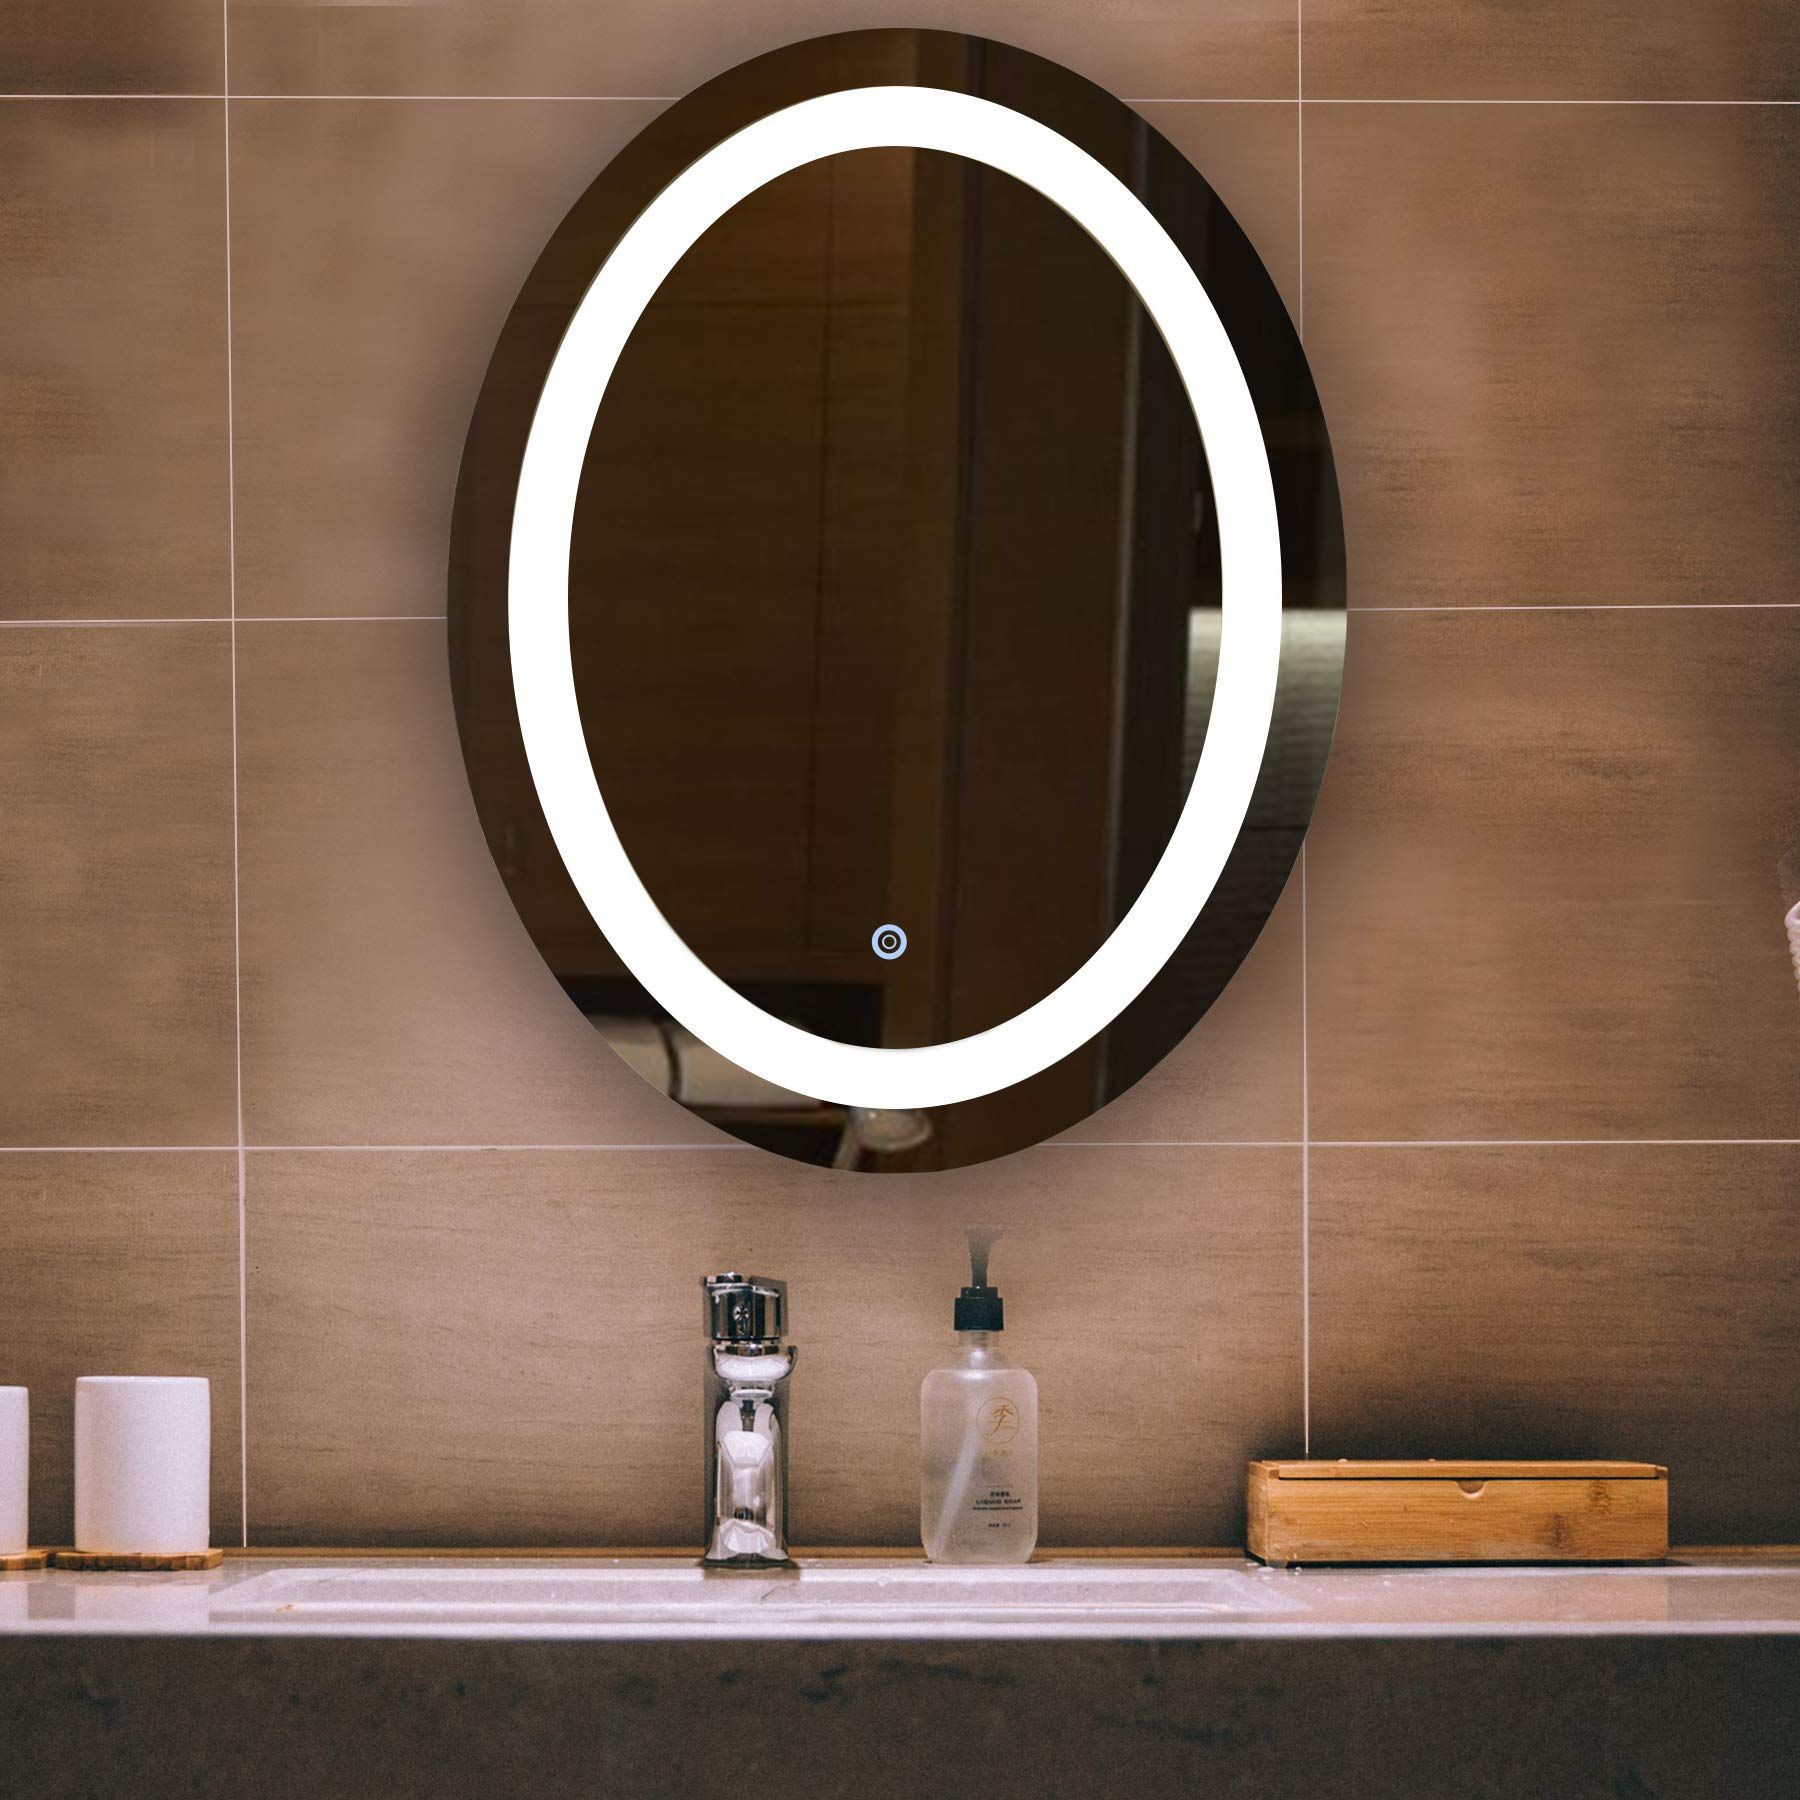 Co Z Dimmable Oval Led Bathroom Mirror — To View Further For This Item Intended For Oval Frameless Led Wall Mirrors (View 4 of 15)